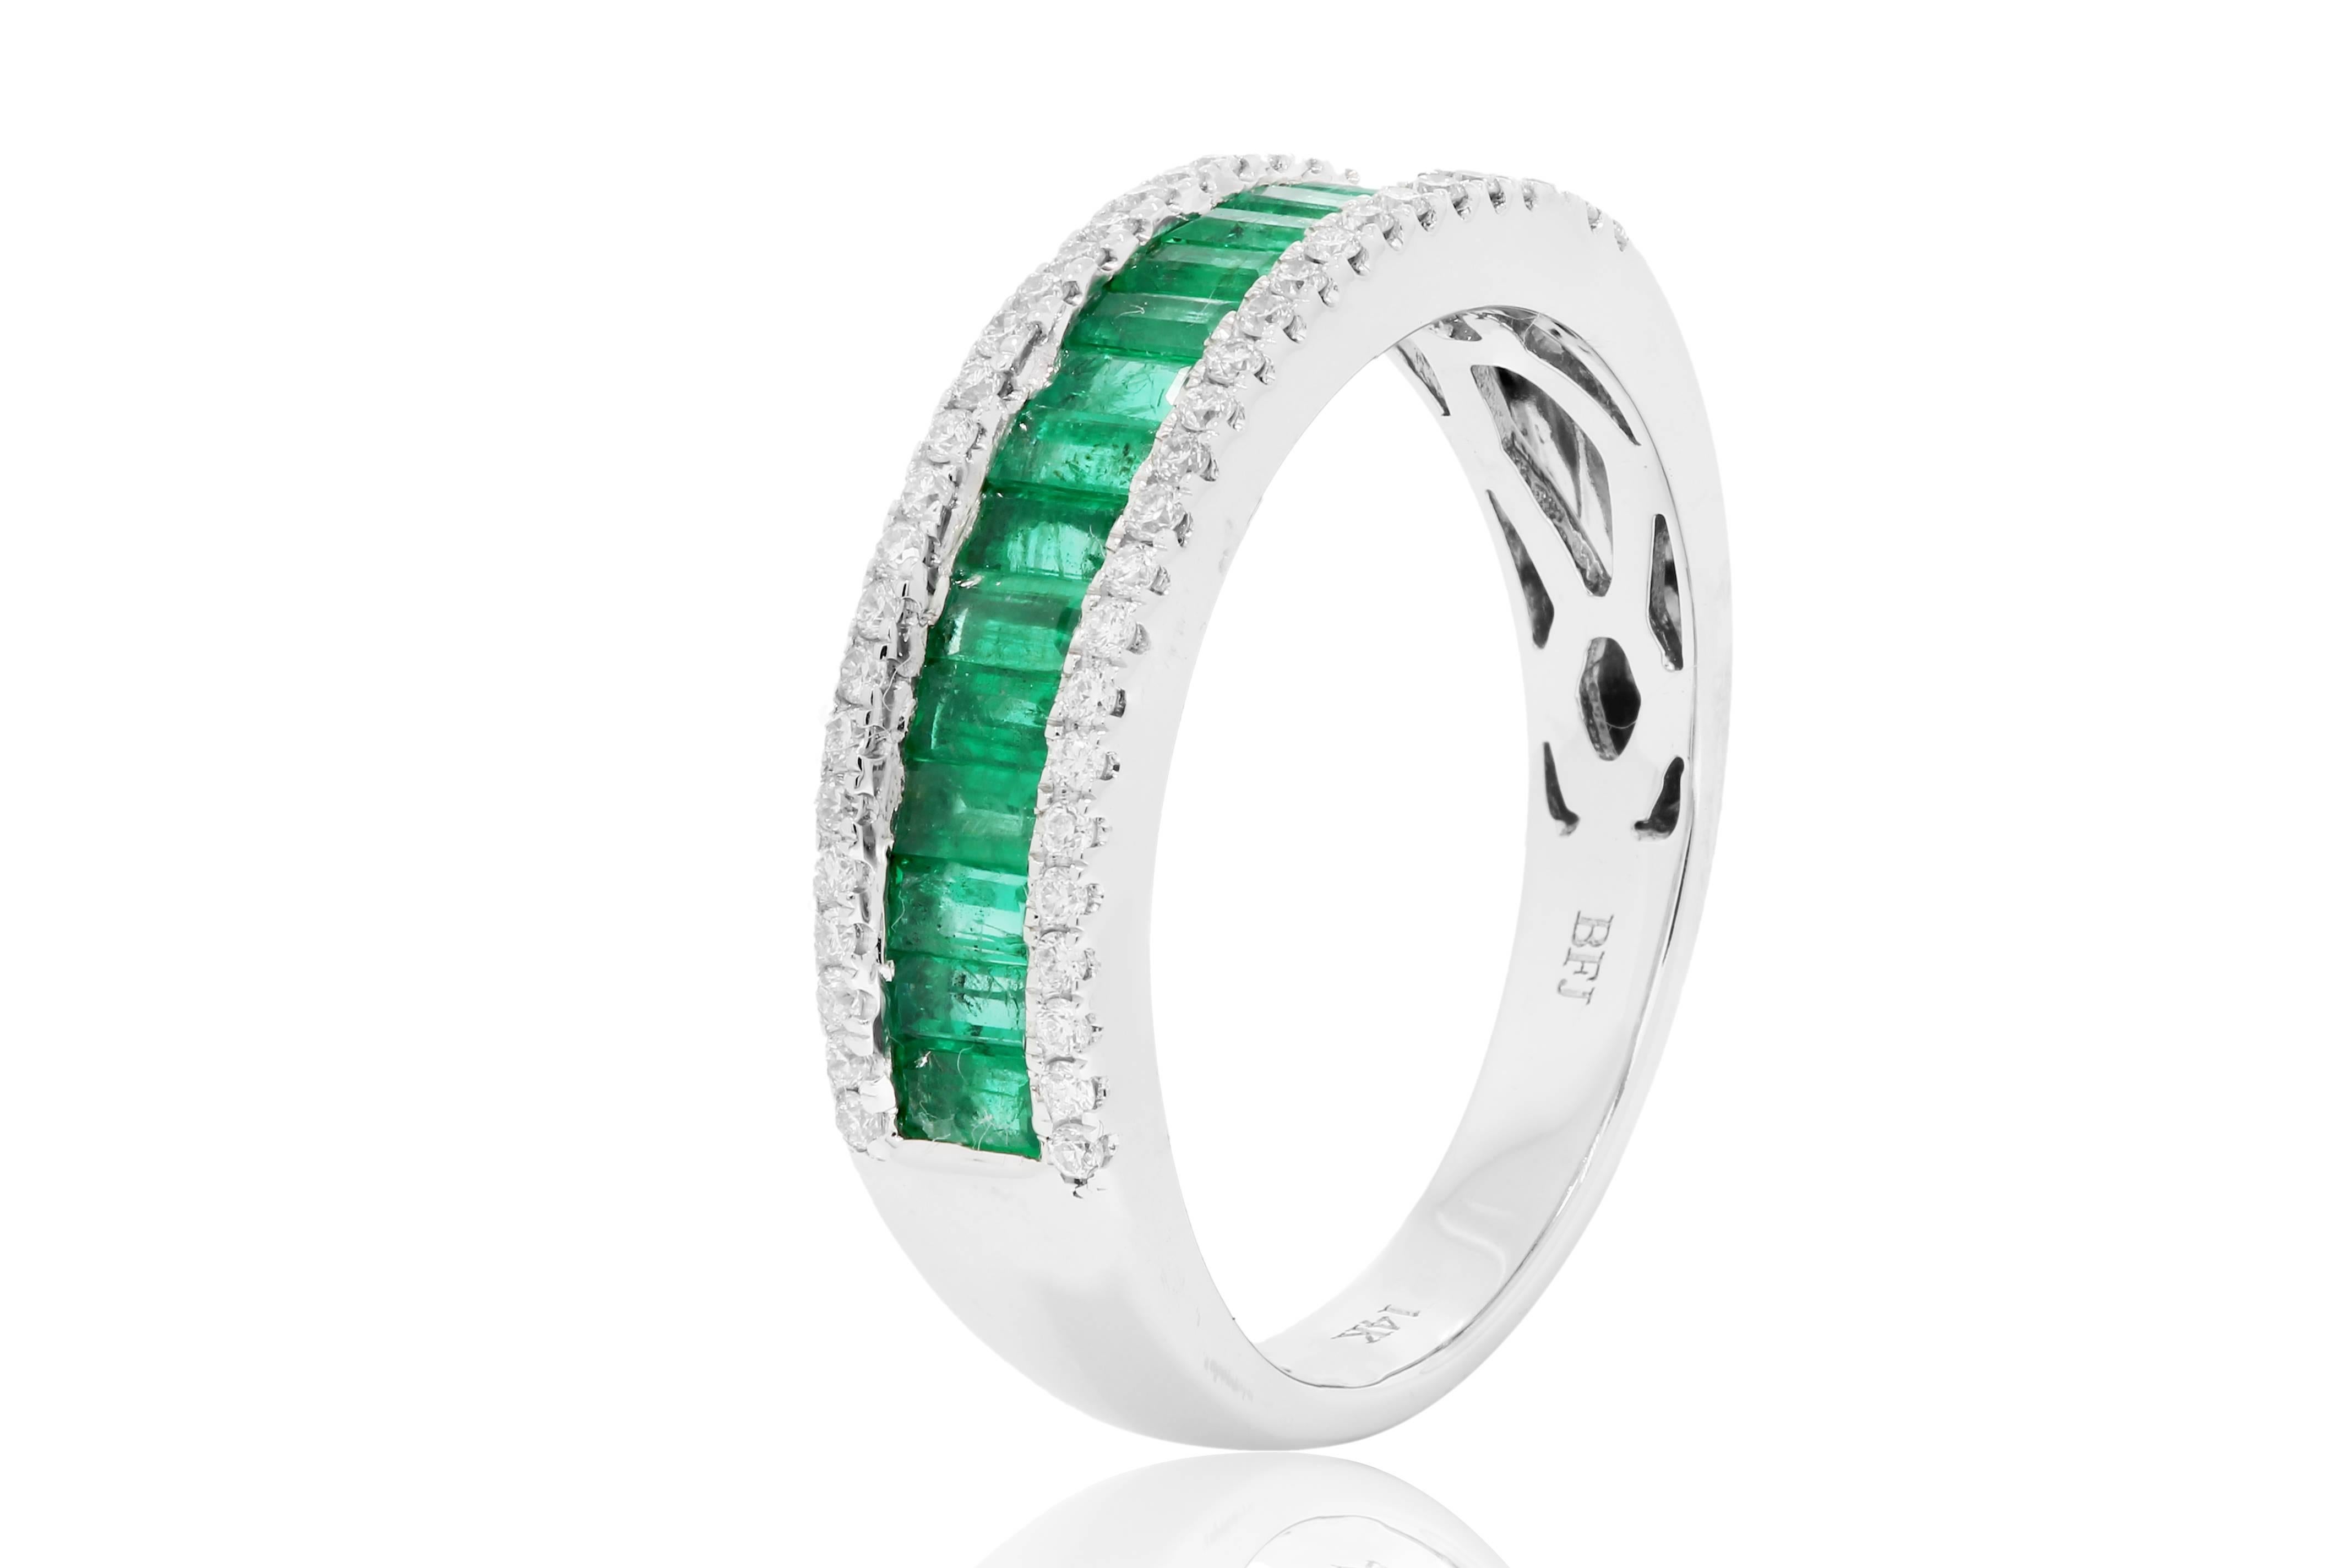 Emerald Baguettes 0.82 Carat Flanked by white diamond rounds on side 0.20 Carat in 14K White Gold Band Ring.

Total Stone Weight 1.02 Carat